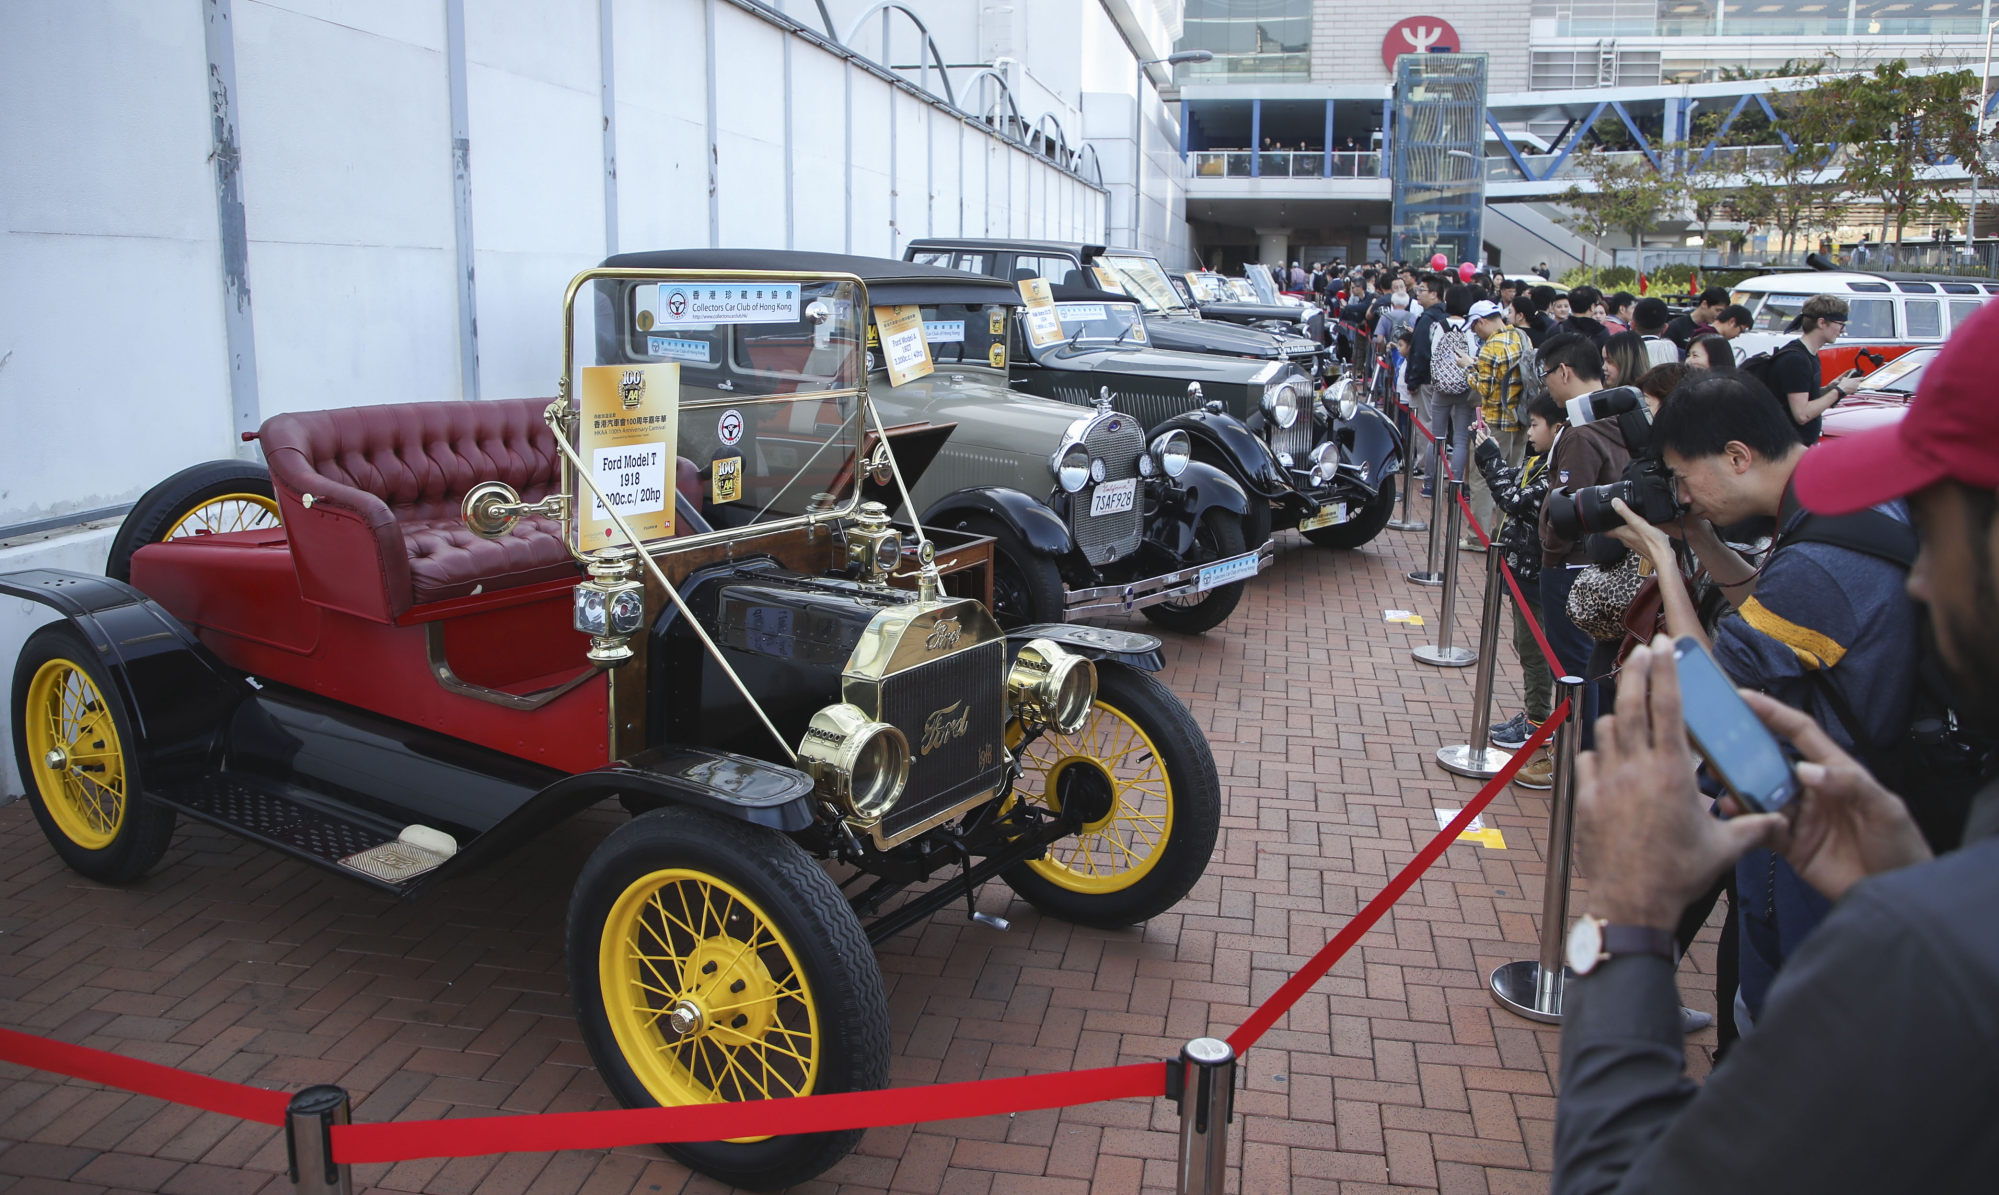 Visitors ogle classic rides during the Automobile Association 100th anniversary carnival held at Edinburgh Place in Central in 2018. Photo: Edward Wong